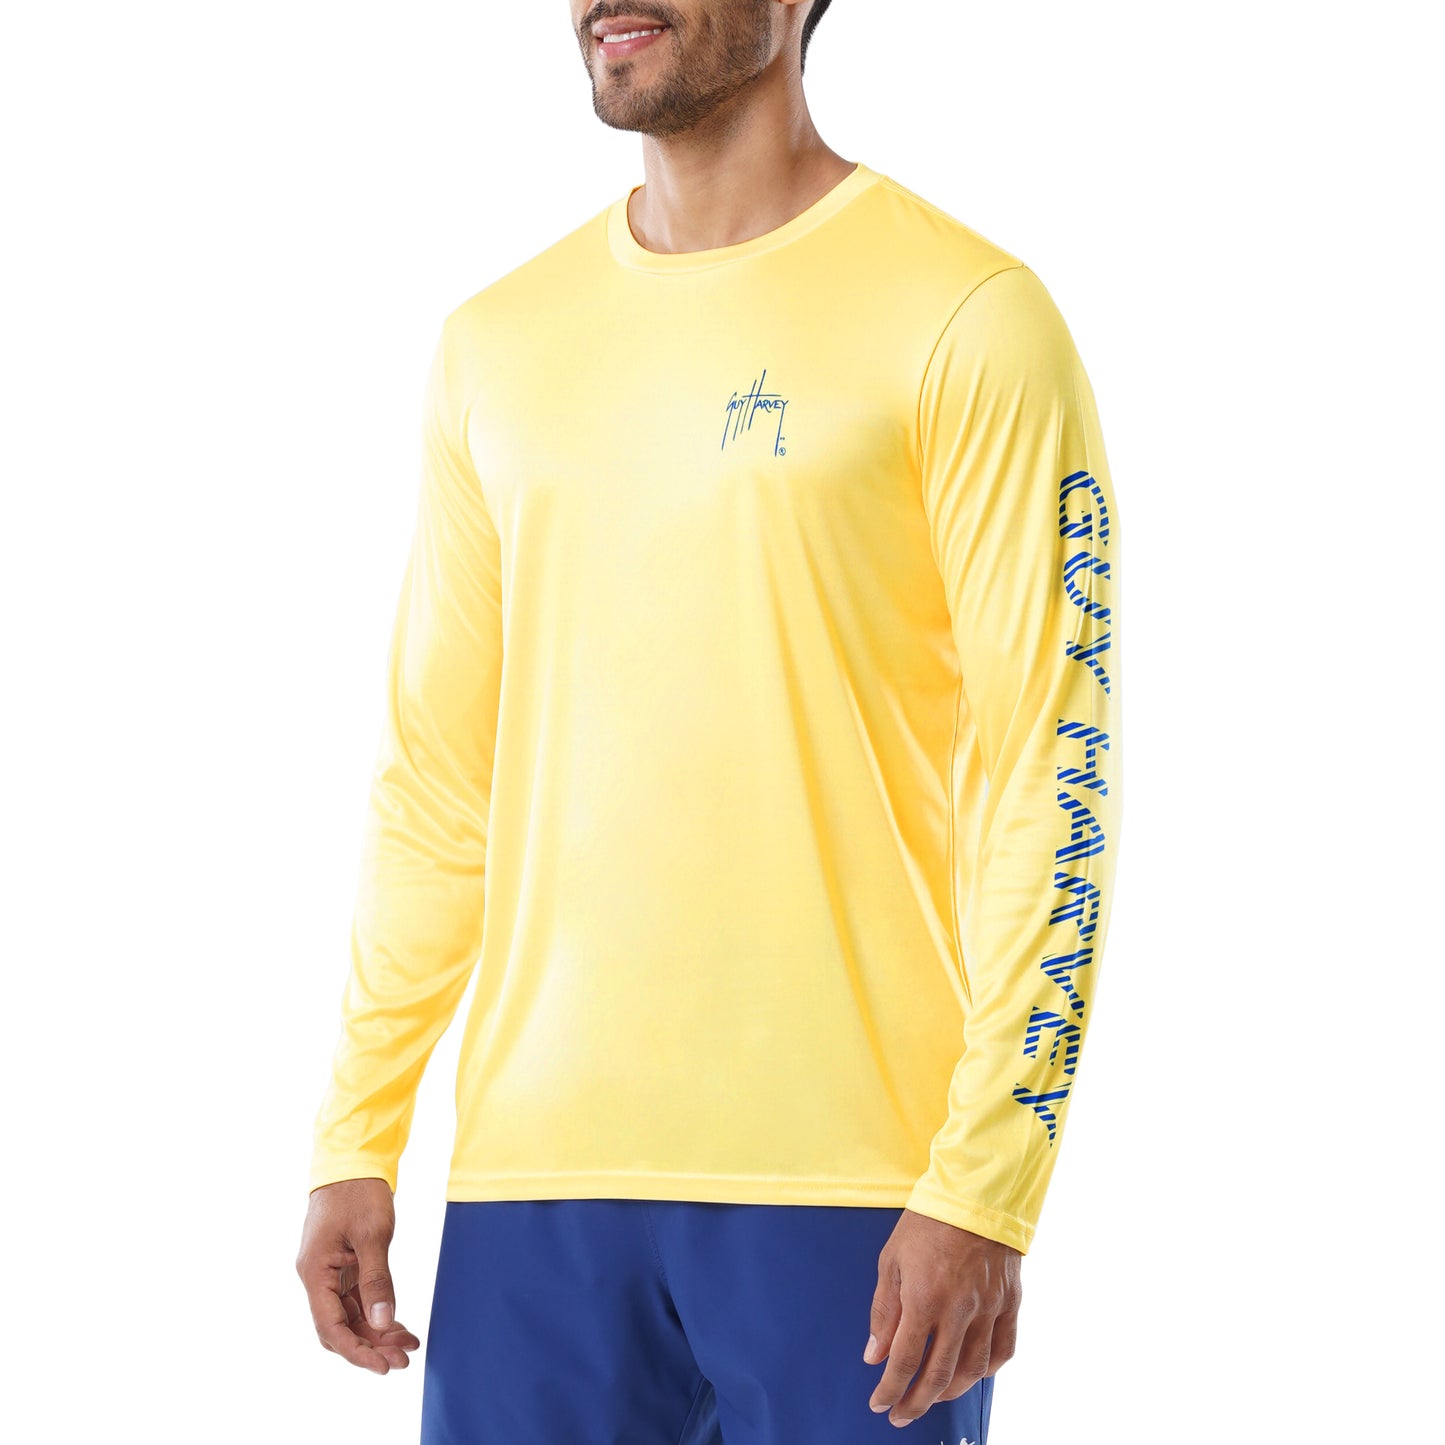 Men's The Art of Offshore Performance Sun Protection Top View 4